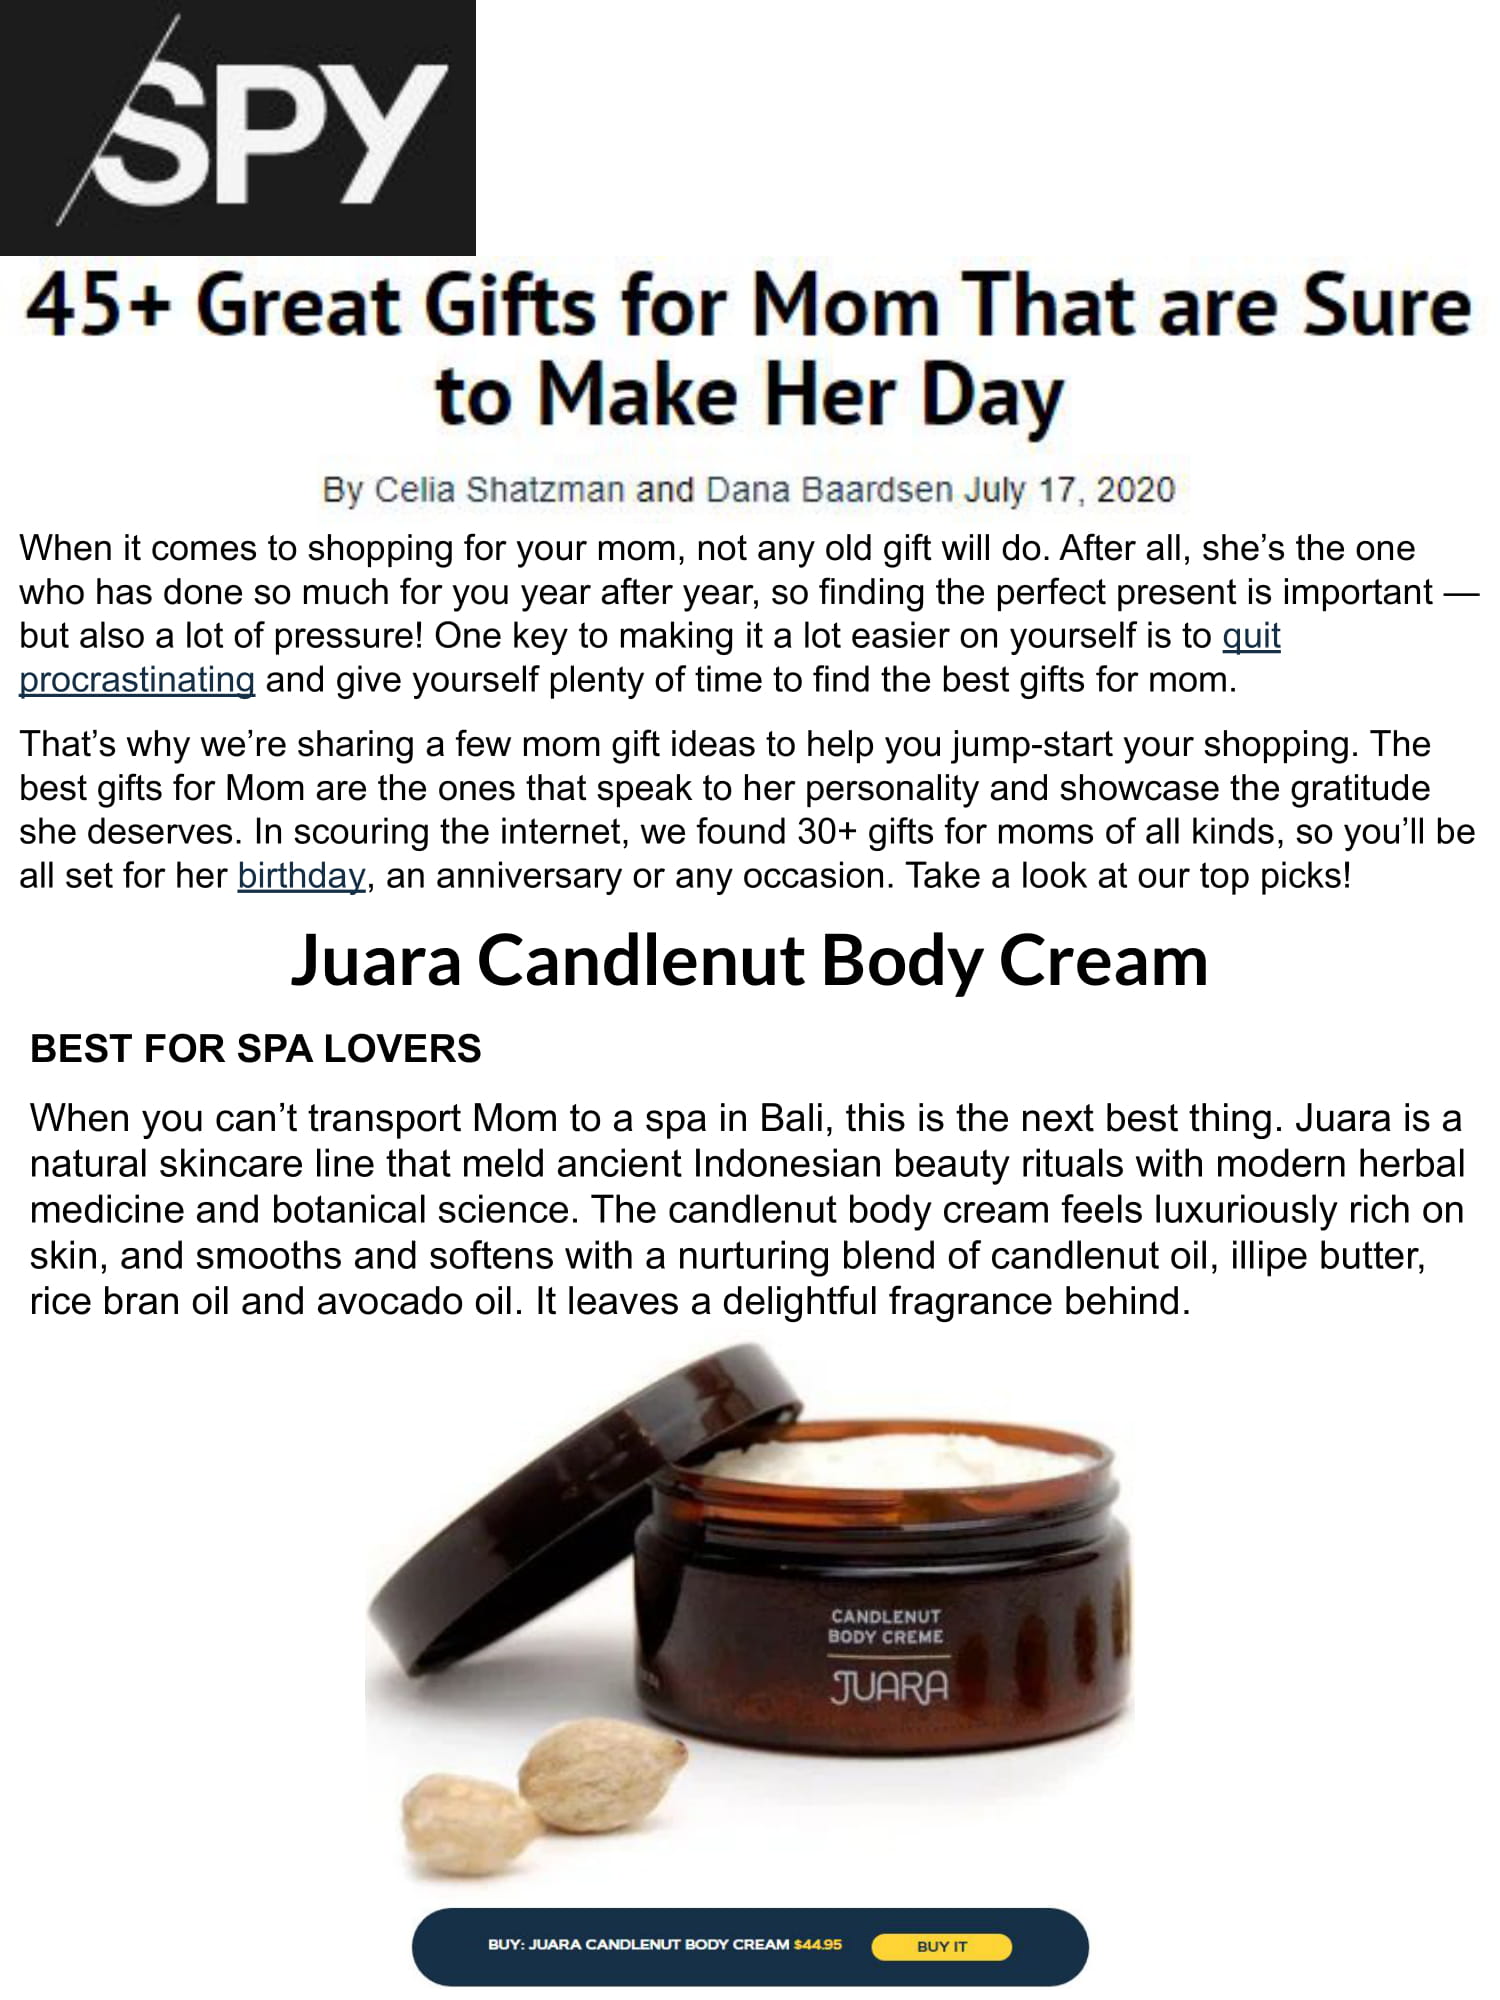 SPY: 45+ Great Gifts for Mom That are Sure to Make Her Day JUARA Skincare